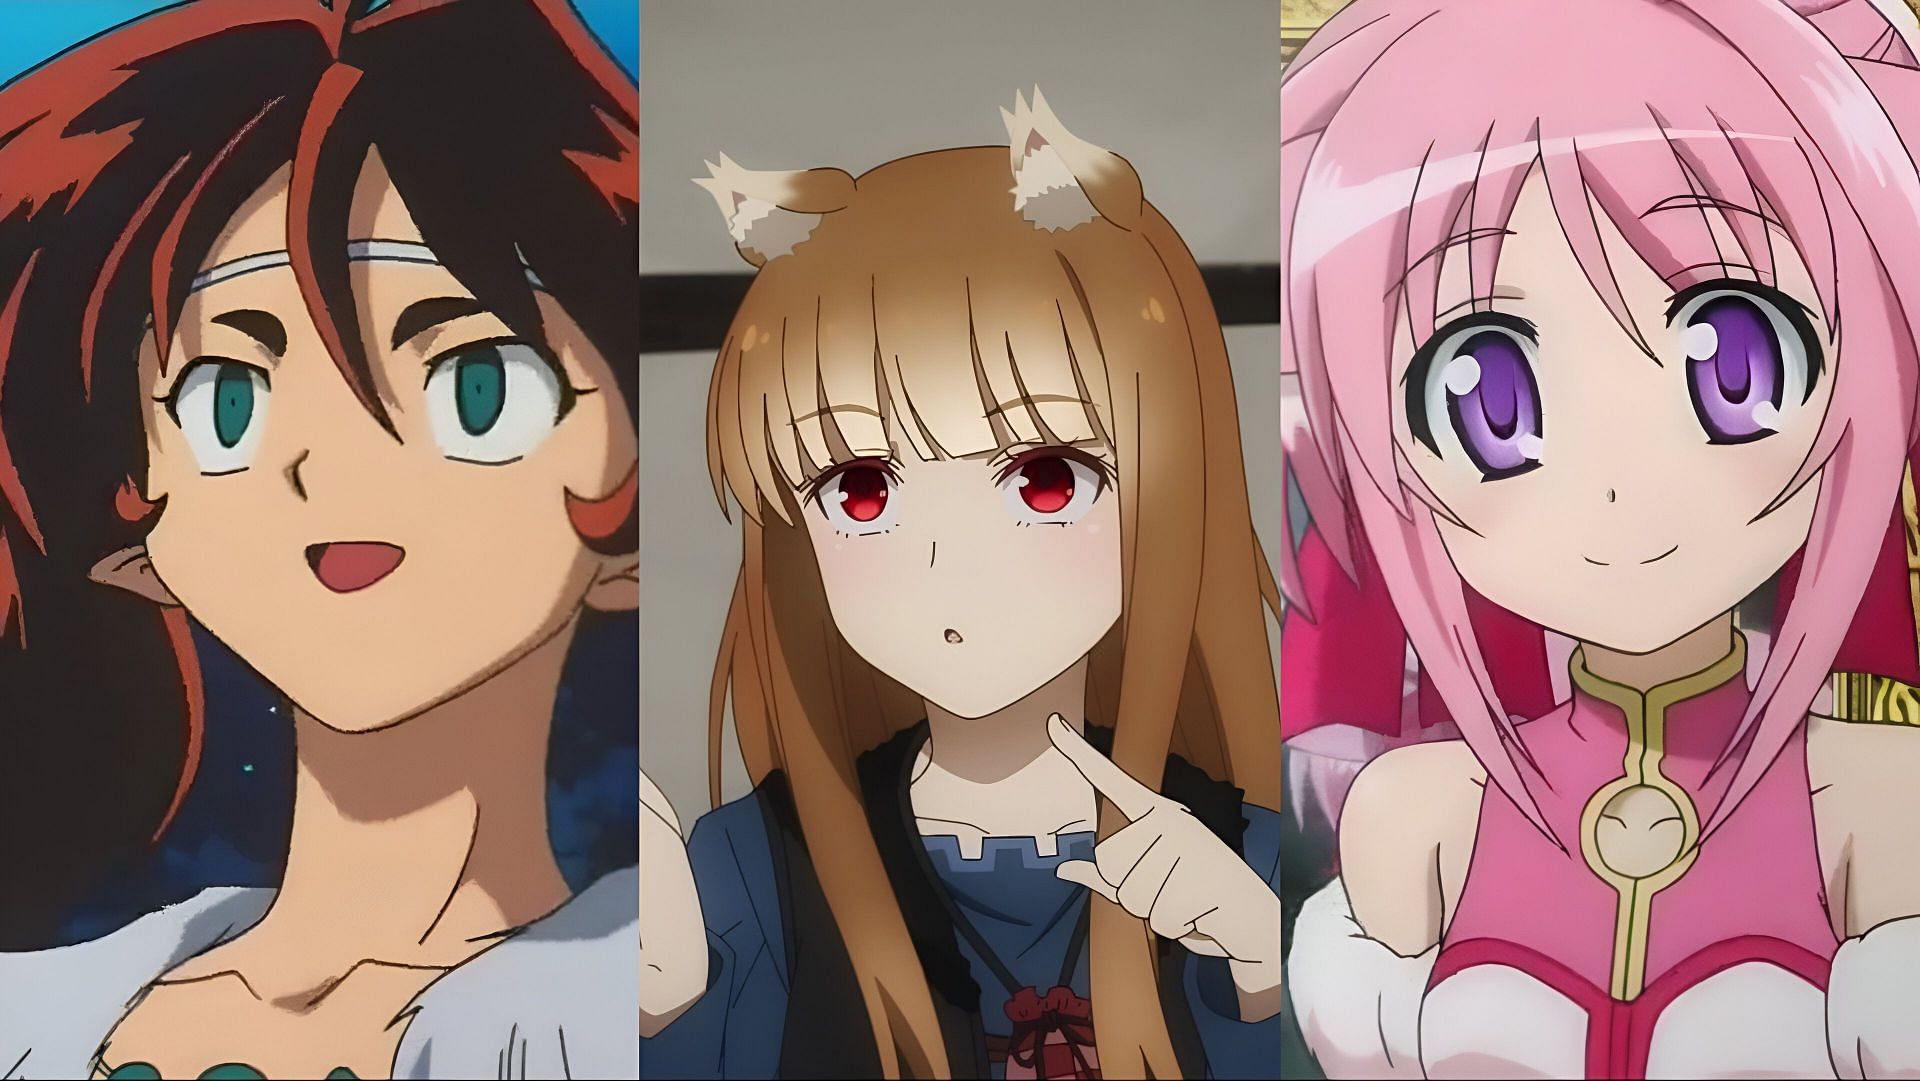 Some of the most popular anime wolf girls that fans adore (Image via Studio Passione, Sunrise, and Seven Arcs)